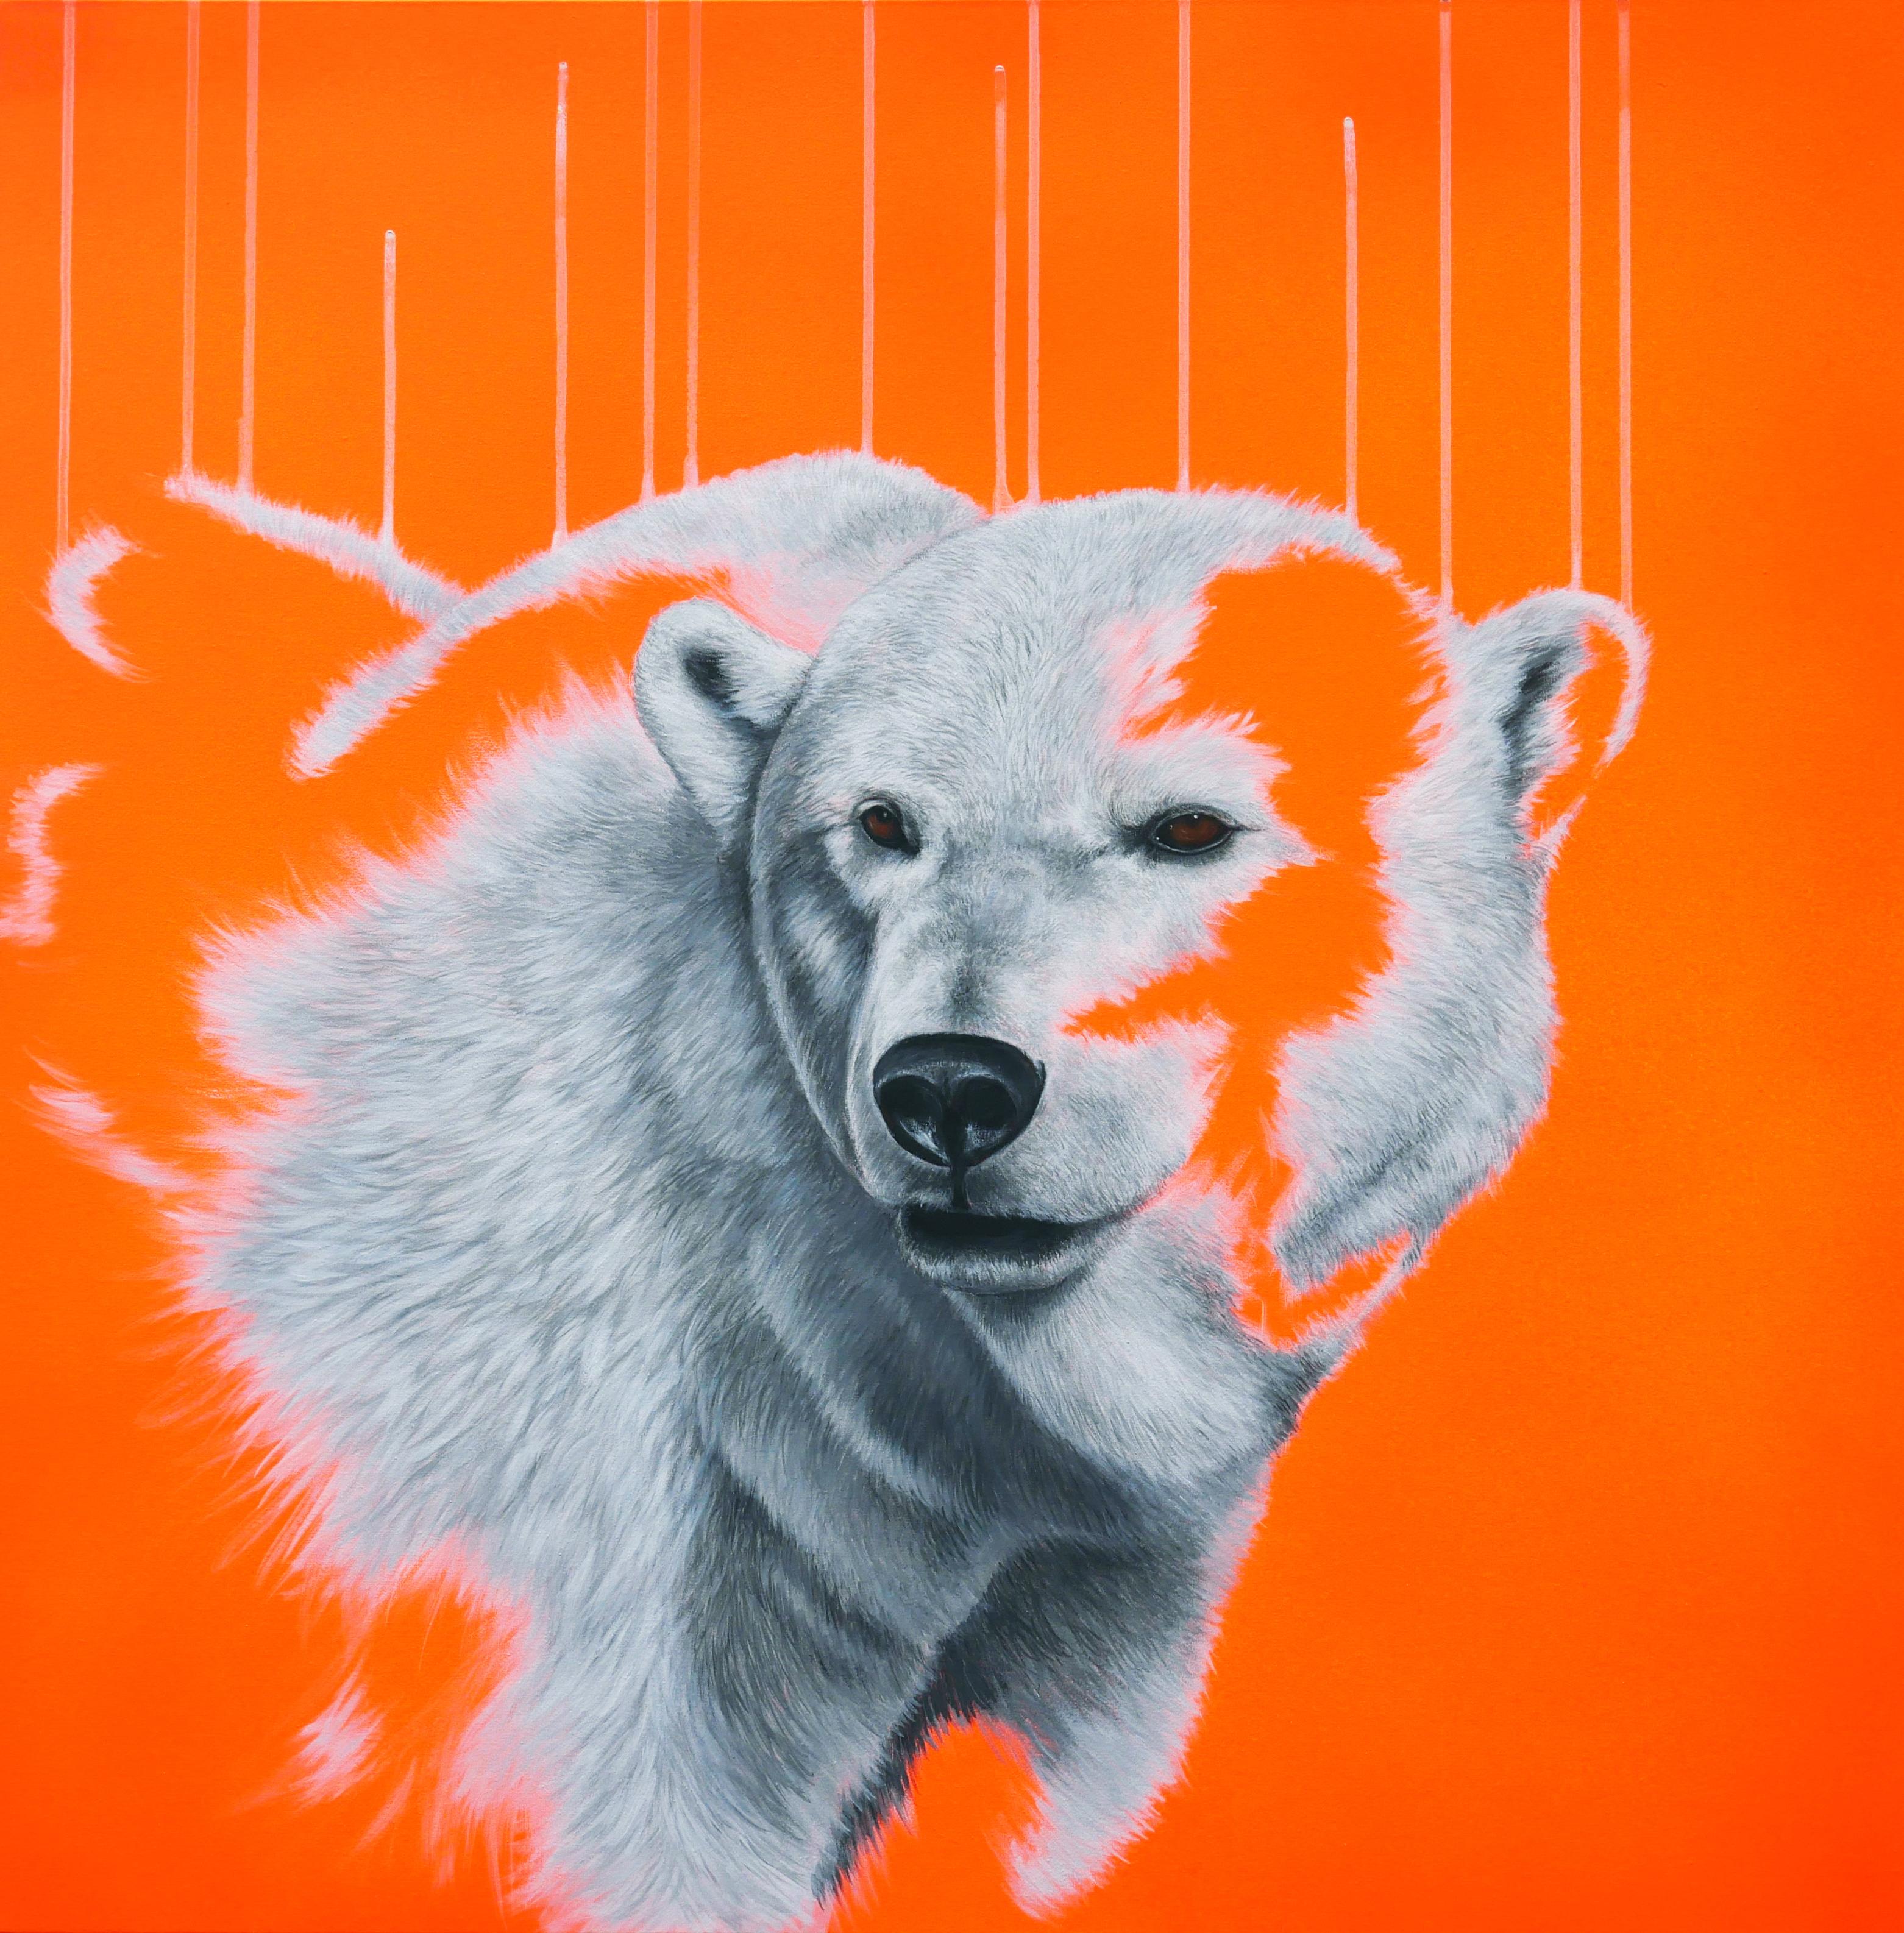 Louise McNaught Animal Painting - Northern Lights - Oil, Acrylic, Spray Paint, Deep Canvas, Contemporary, Neon